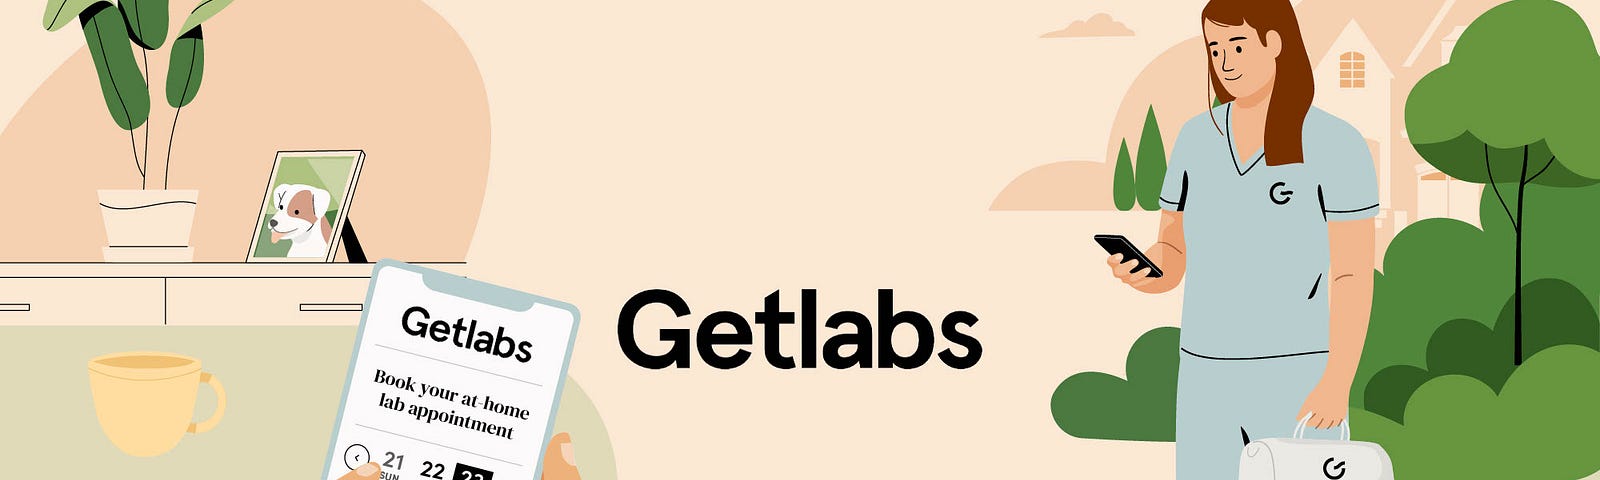 Getlabs patient booking an at-home lab appointment with a phlebotomist